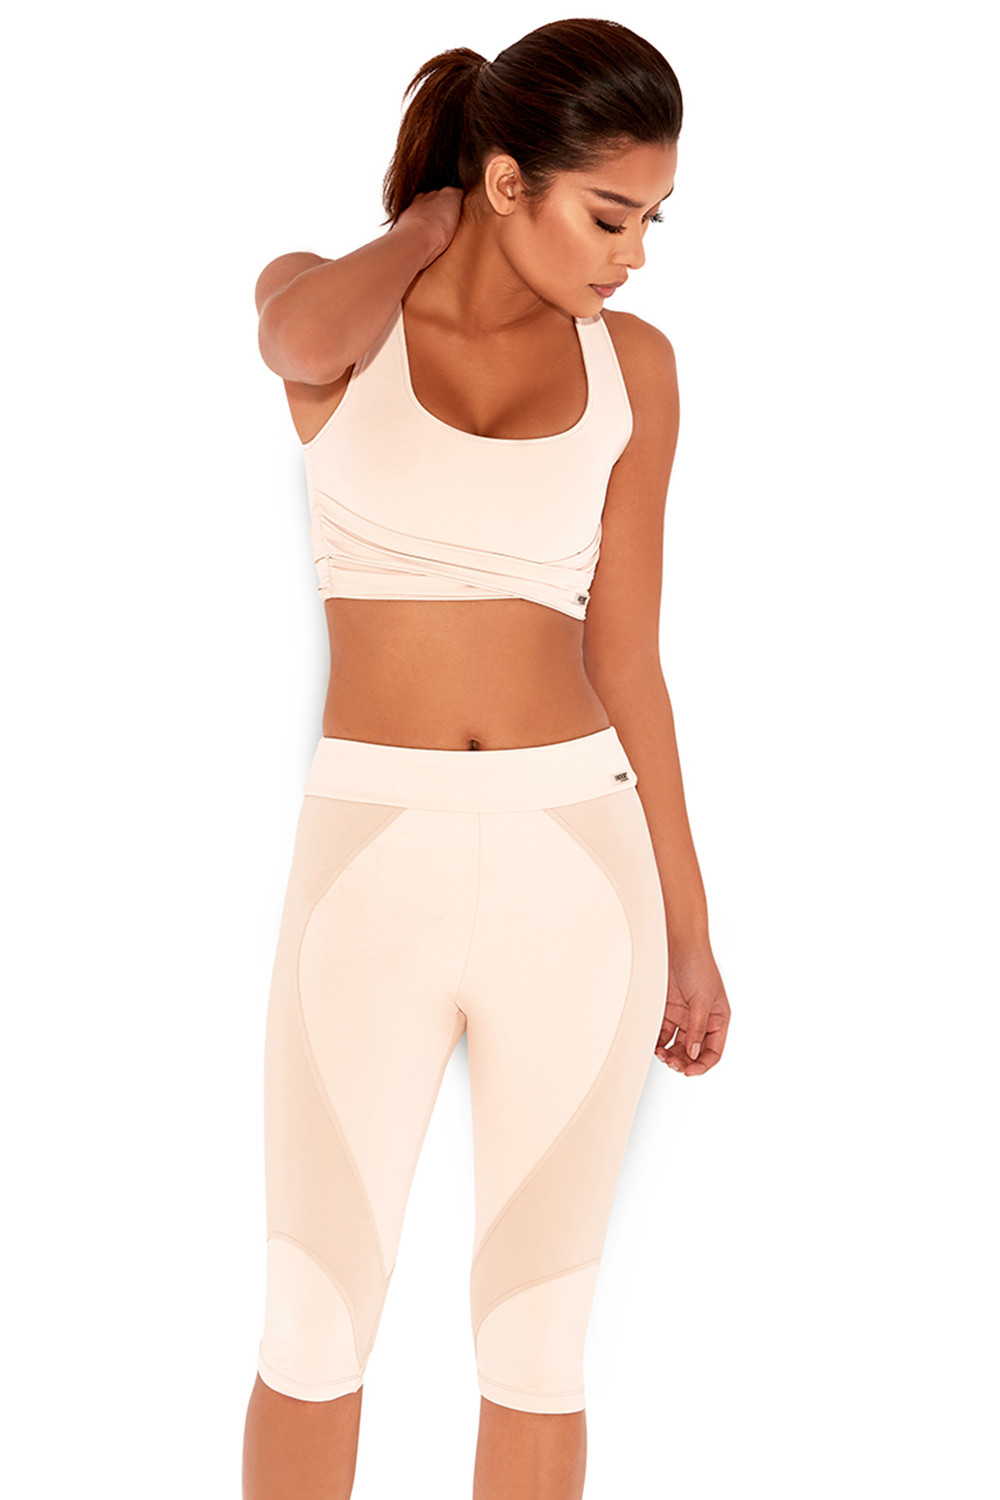 'Relax' Nude & Blush Knee Length Workout Leggings